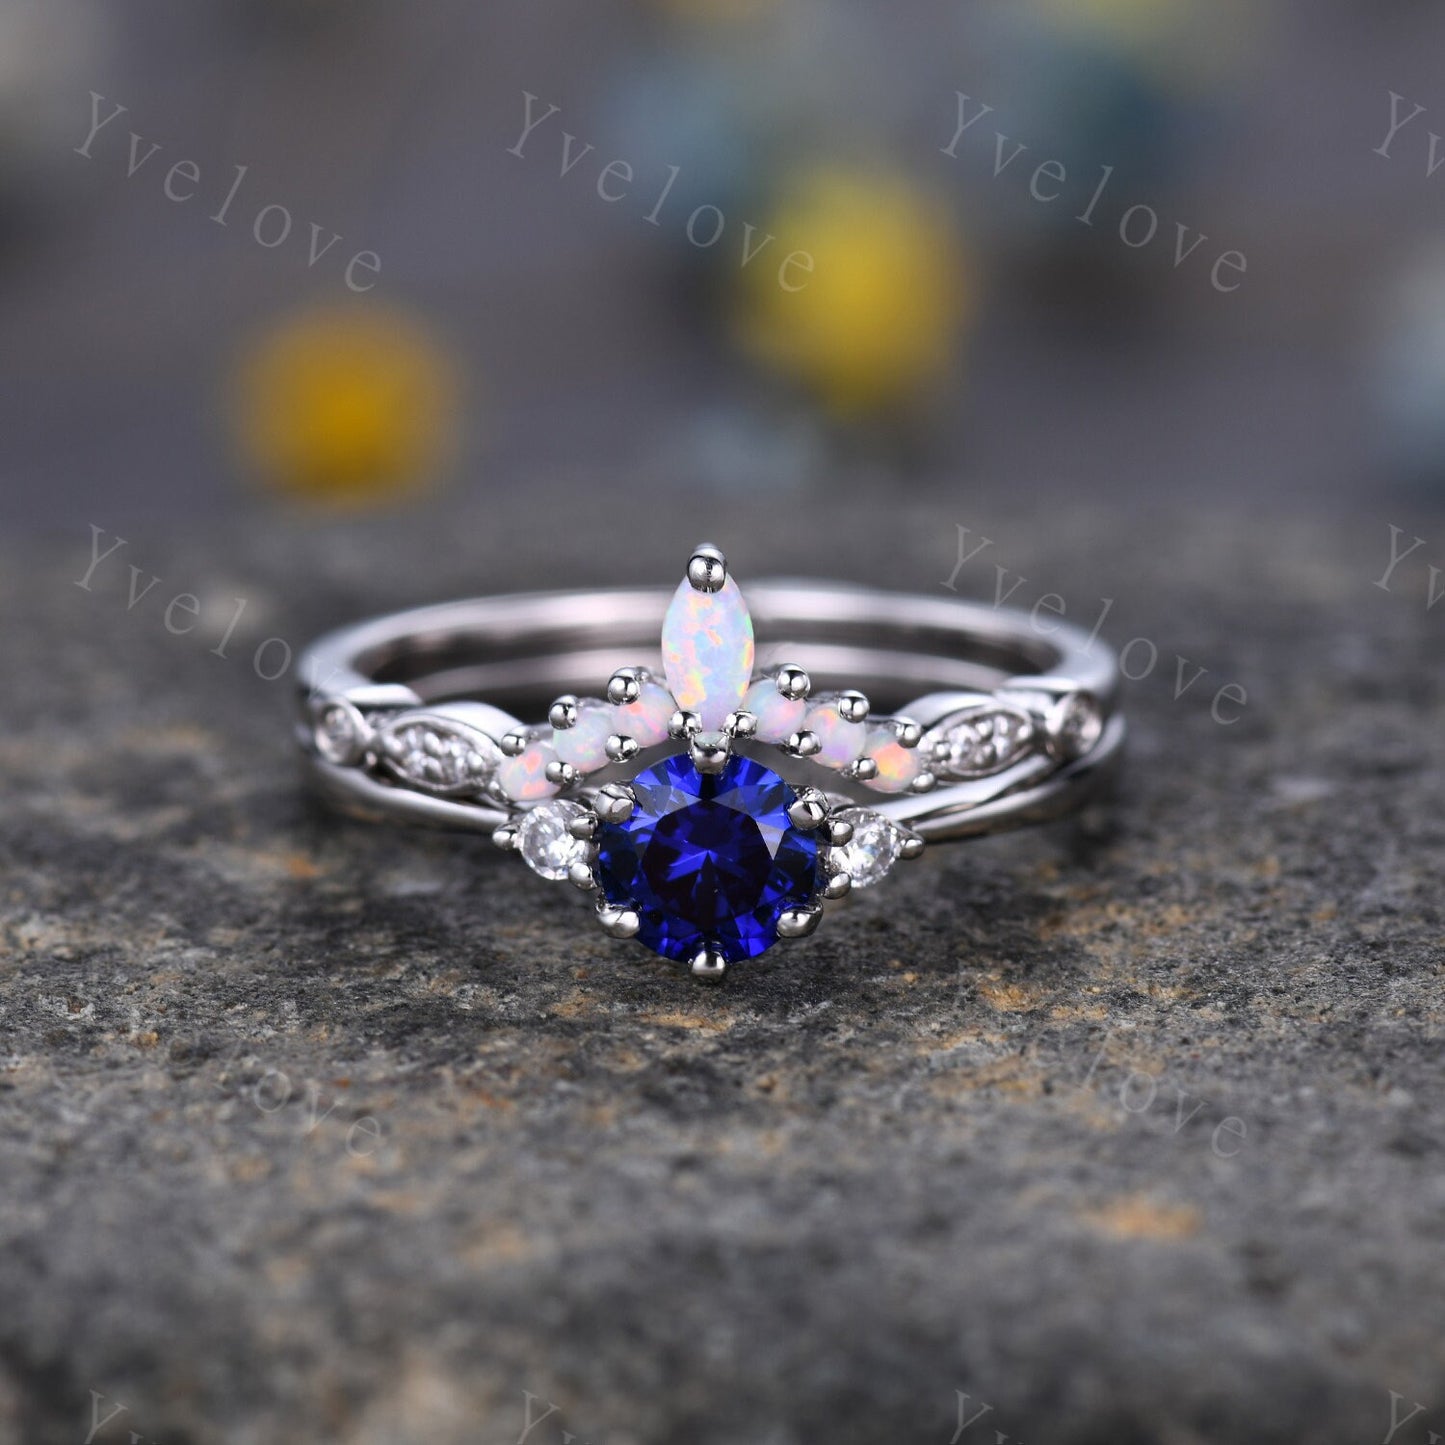 Blue sapphire ring set diamond engagement ring white gold eternity opal curved stacking matching band promise jewelry September birthstone